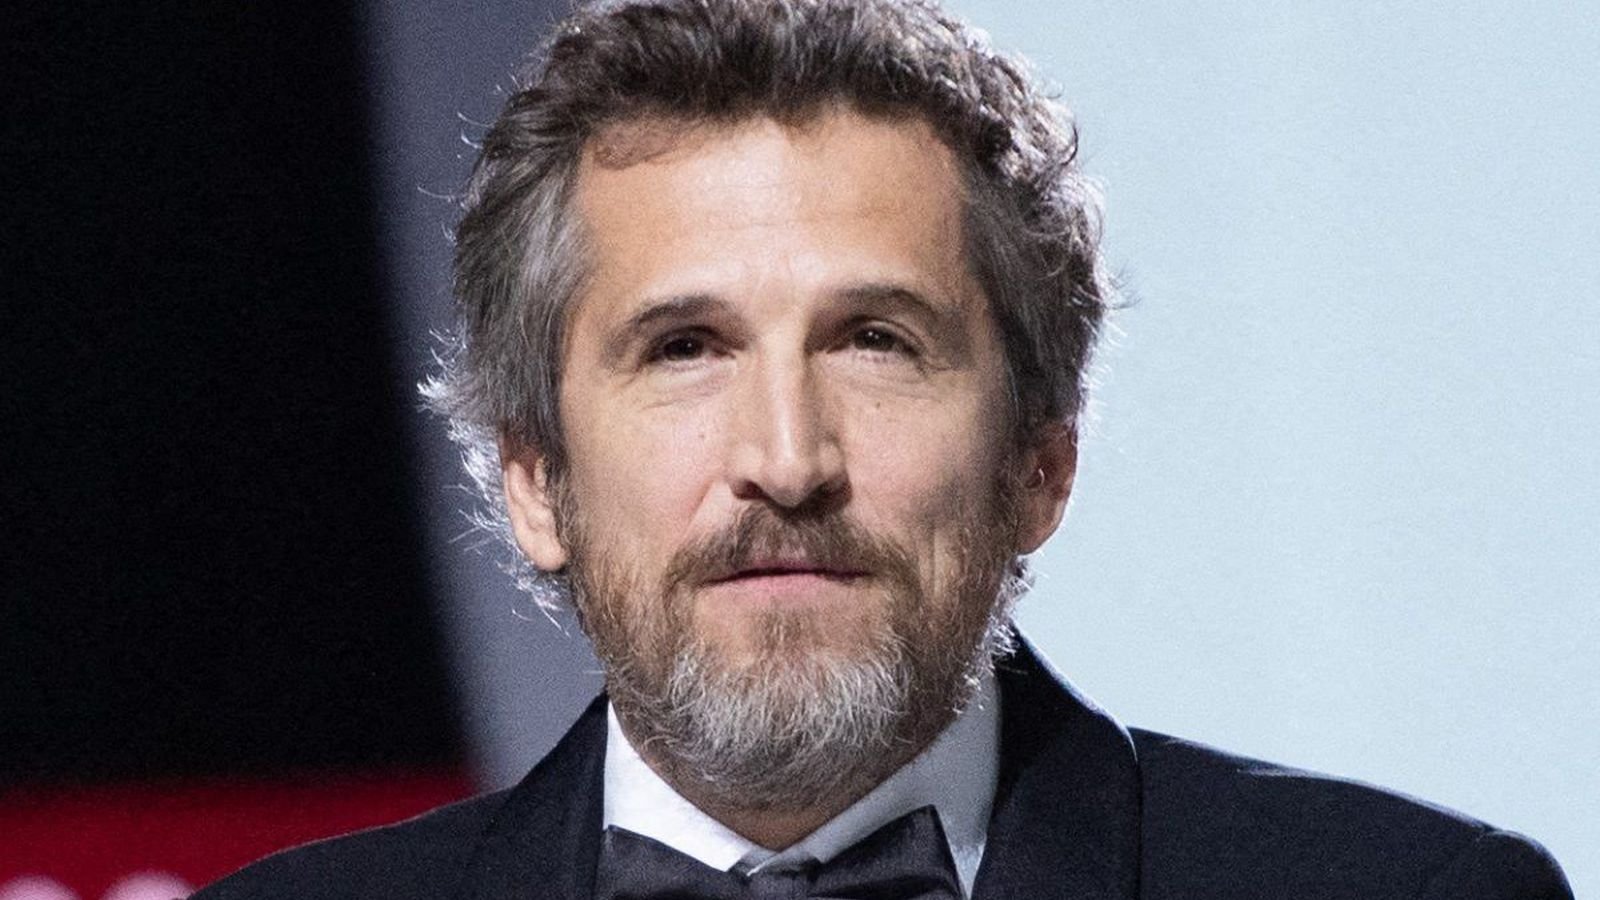 Guillaume Canet e Charlotte Gainsbourg in Belle, thriller poliziesco di Benoît Jacquot